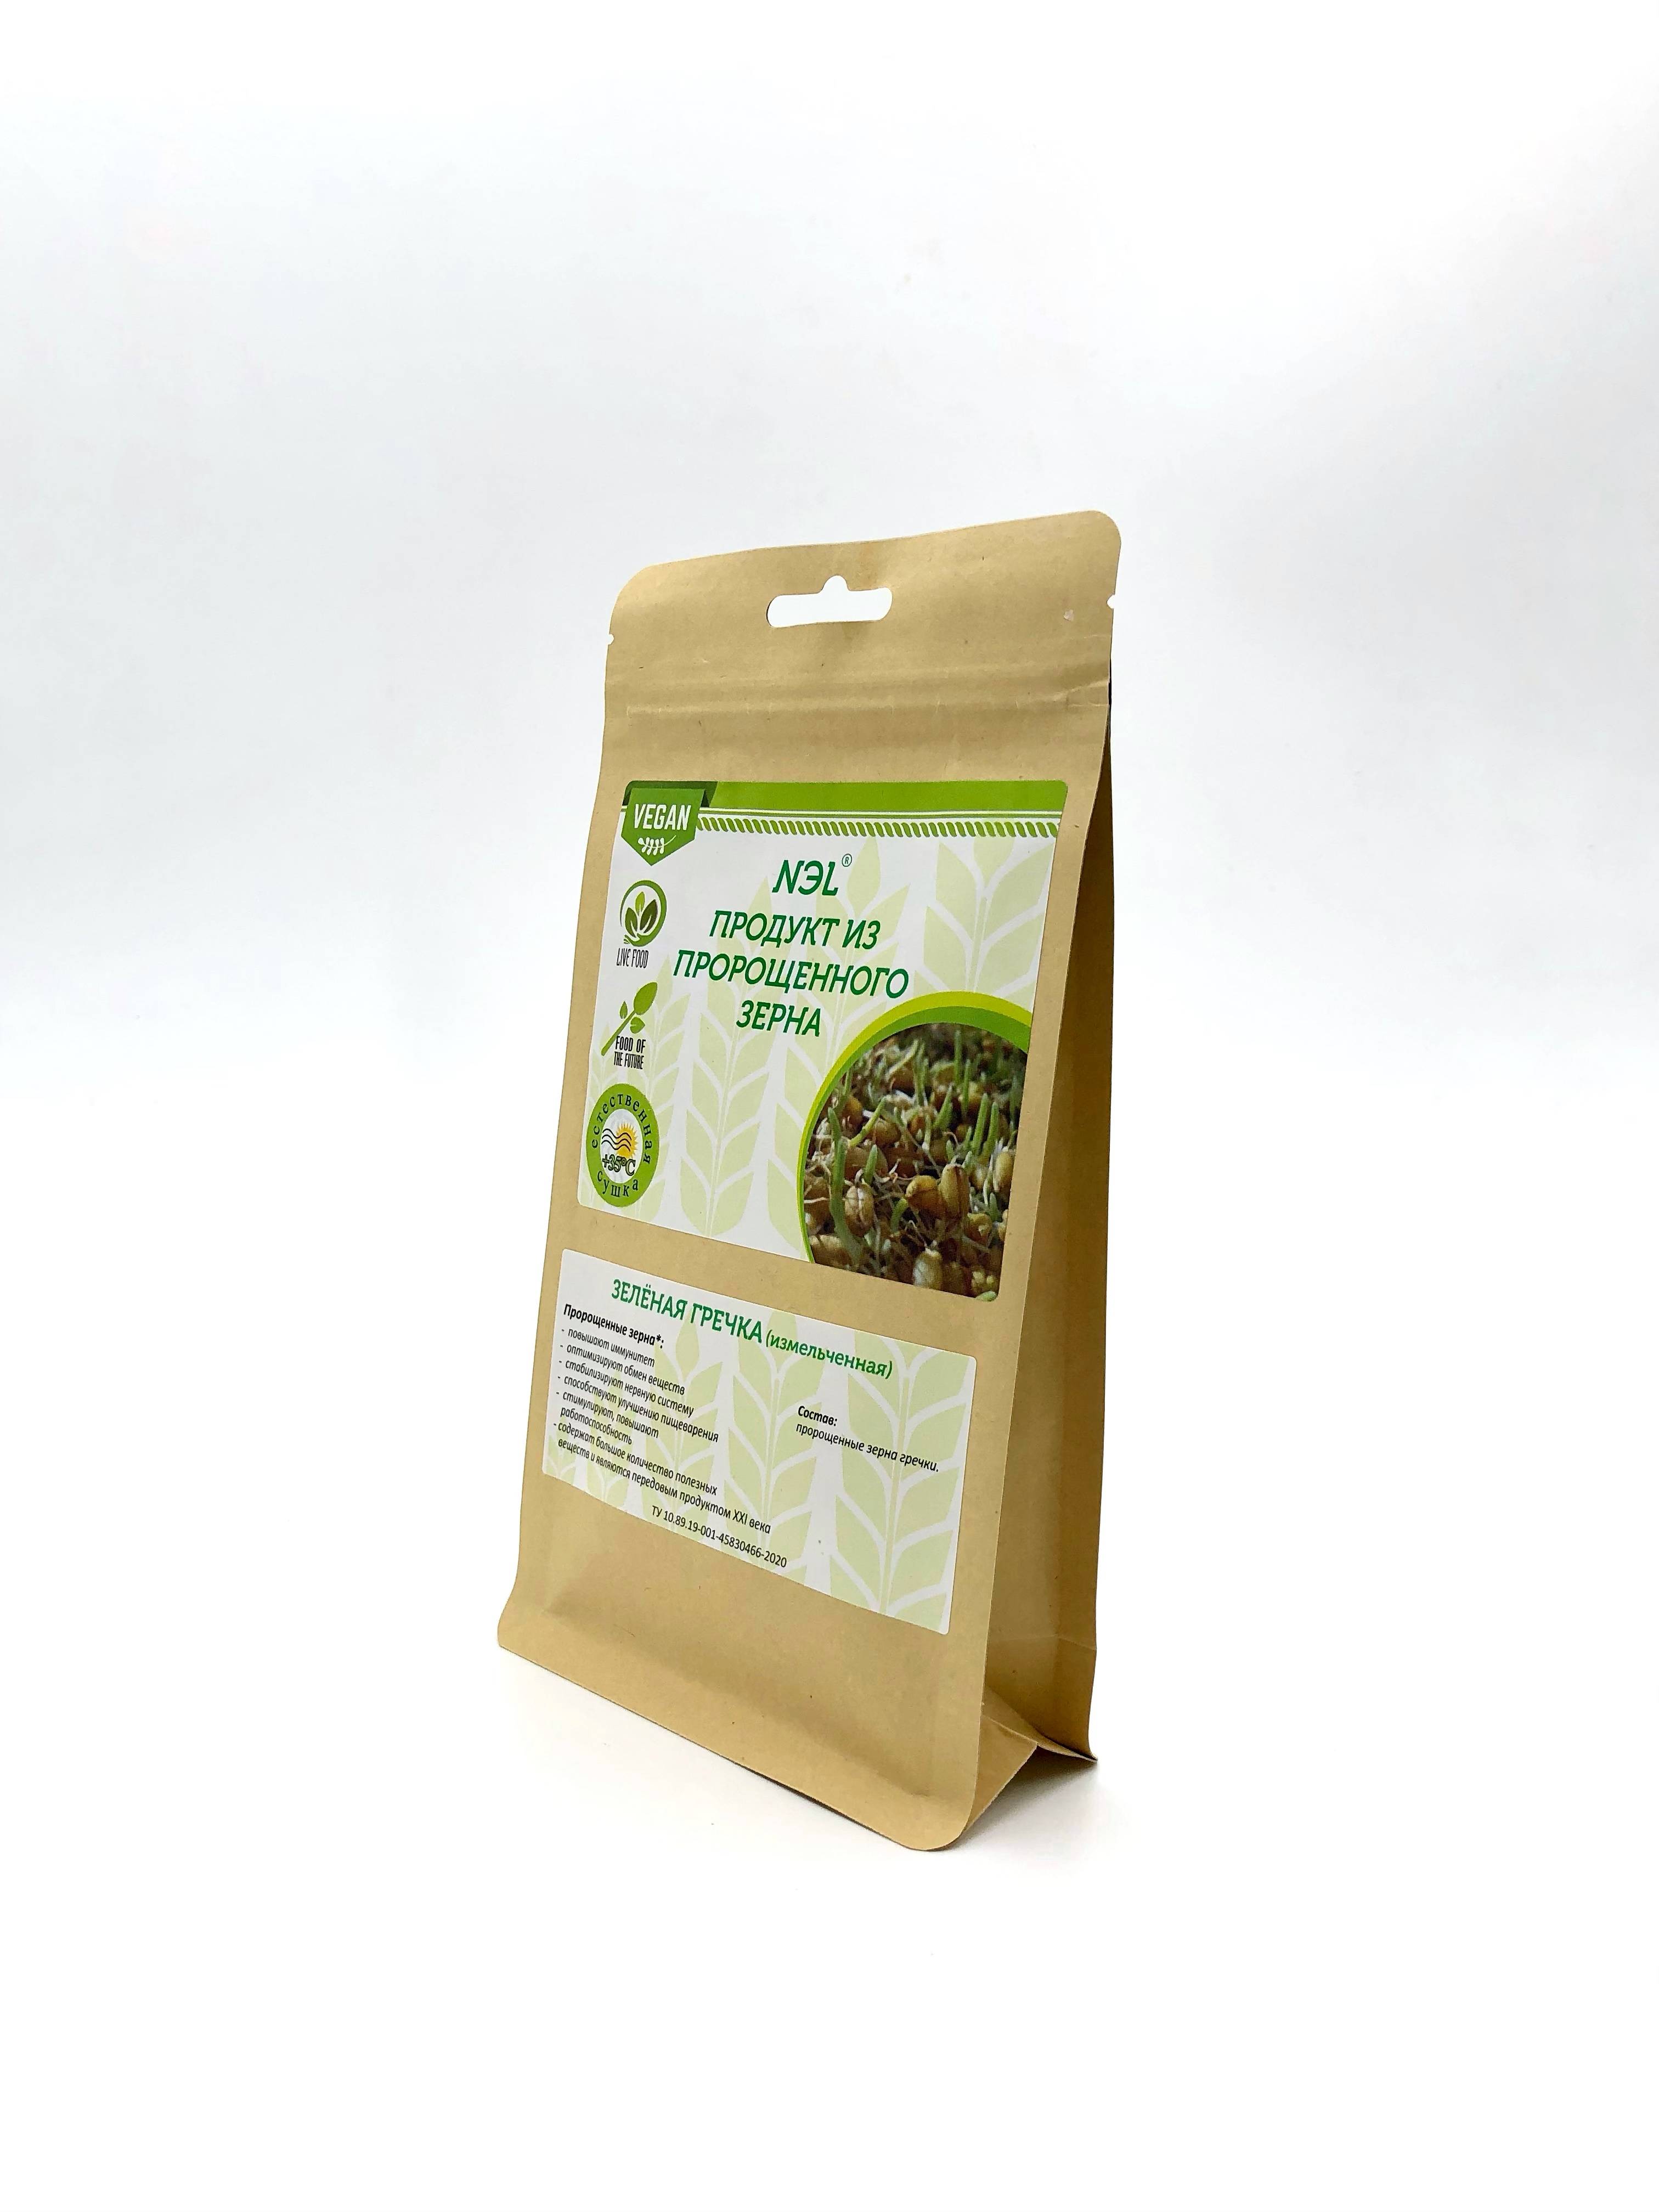 Sprouted buckwheat product 0,25 g - ООО "НЭЛЬ"/Limited Liability Company "NЭL" - Vegetarian food buy wholesale from manufacturer and supplier on UDM.MARKET